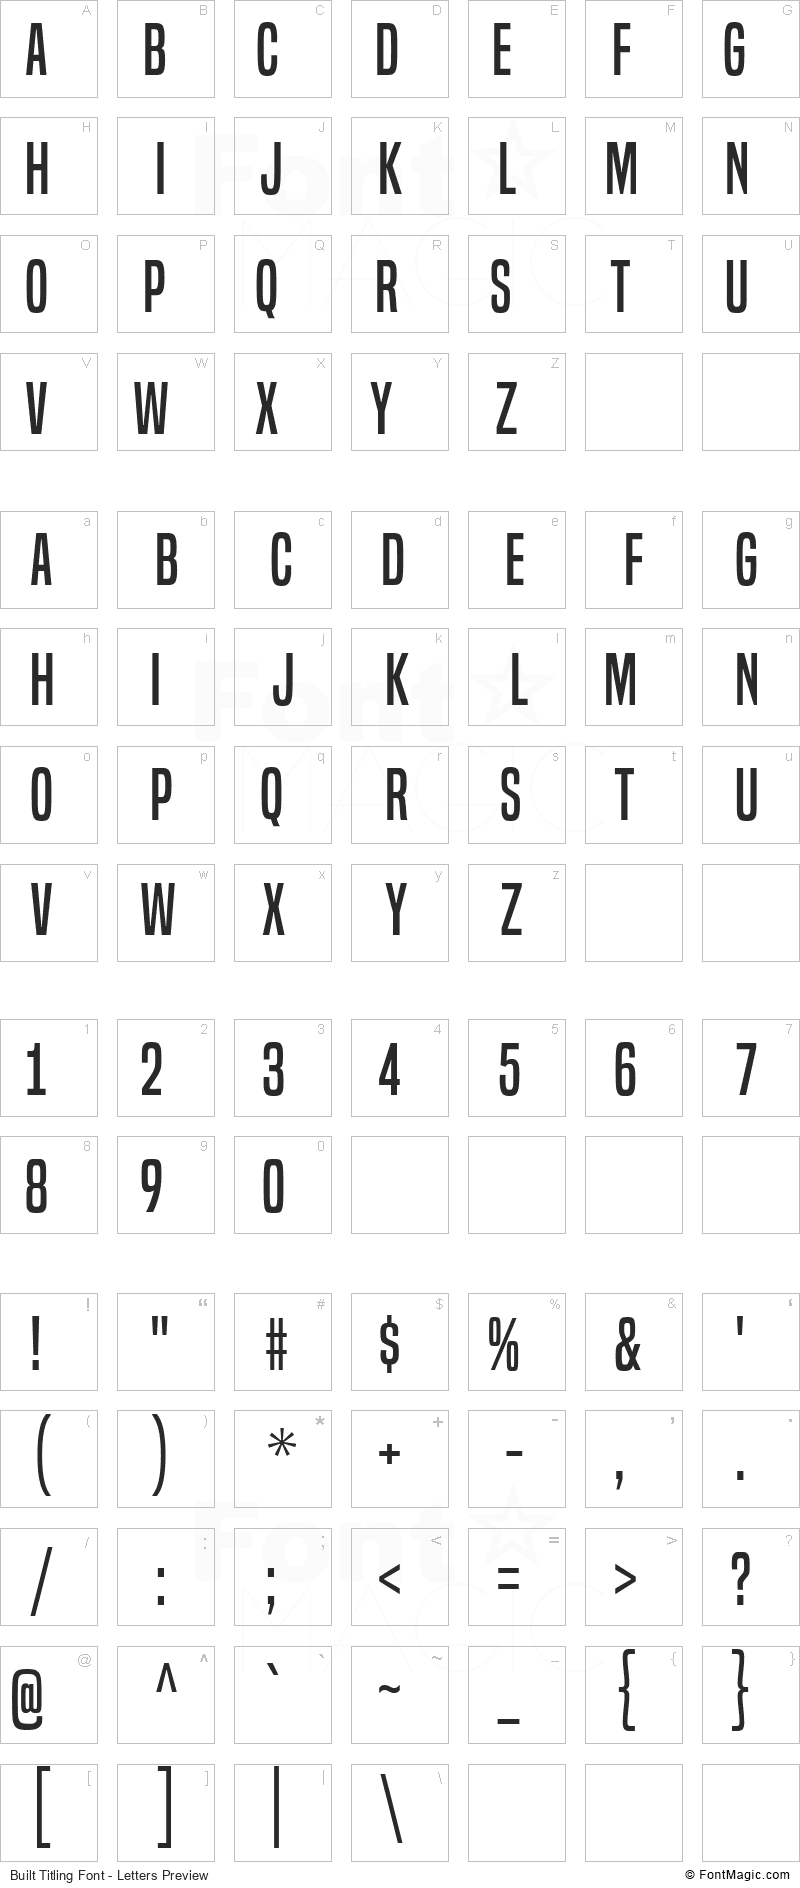 Built Titling Font - All Latters Preview Chart